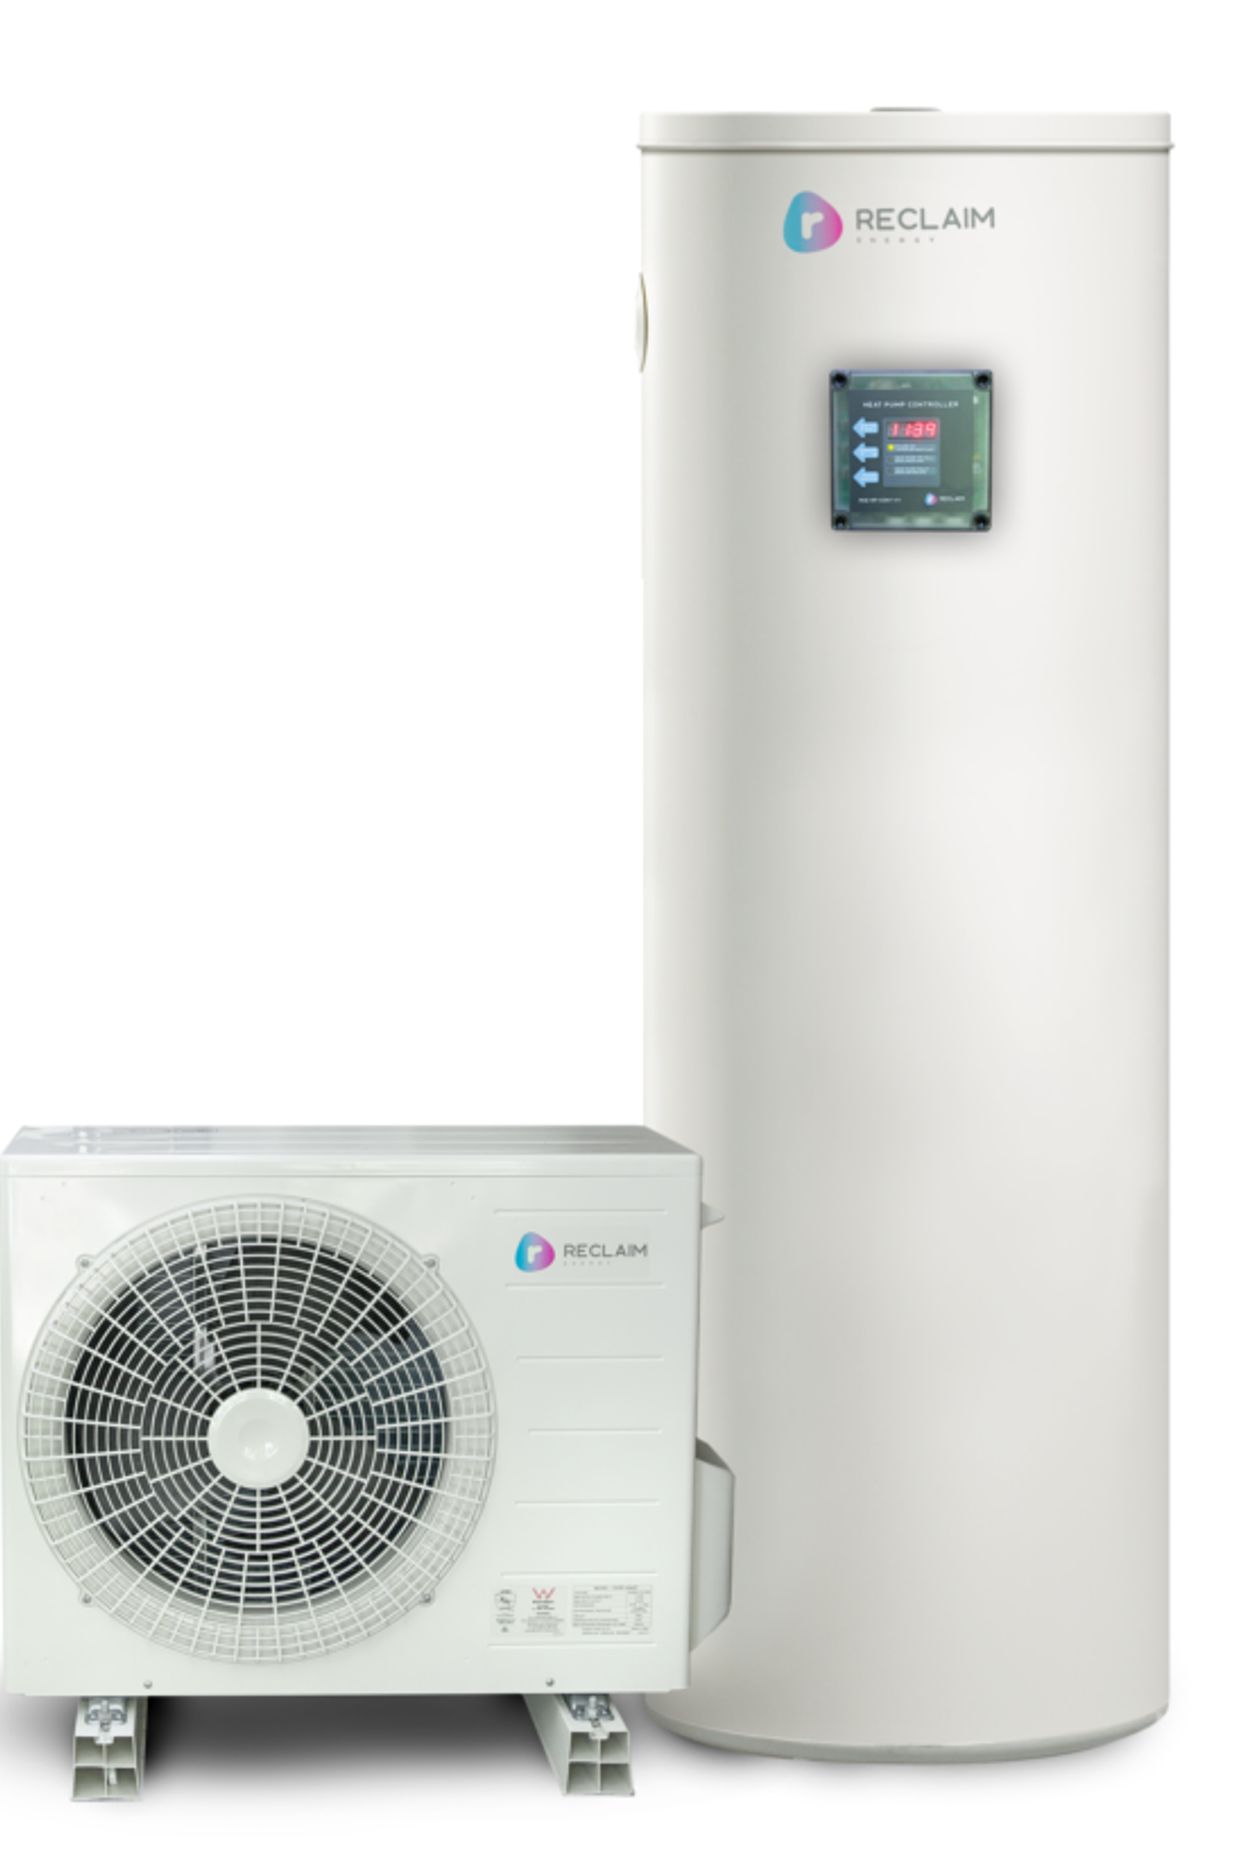 CO2 Hot Water Heat Pumps Explained